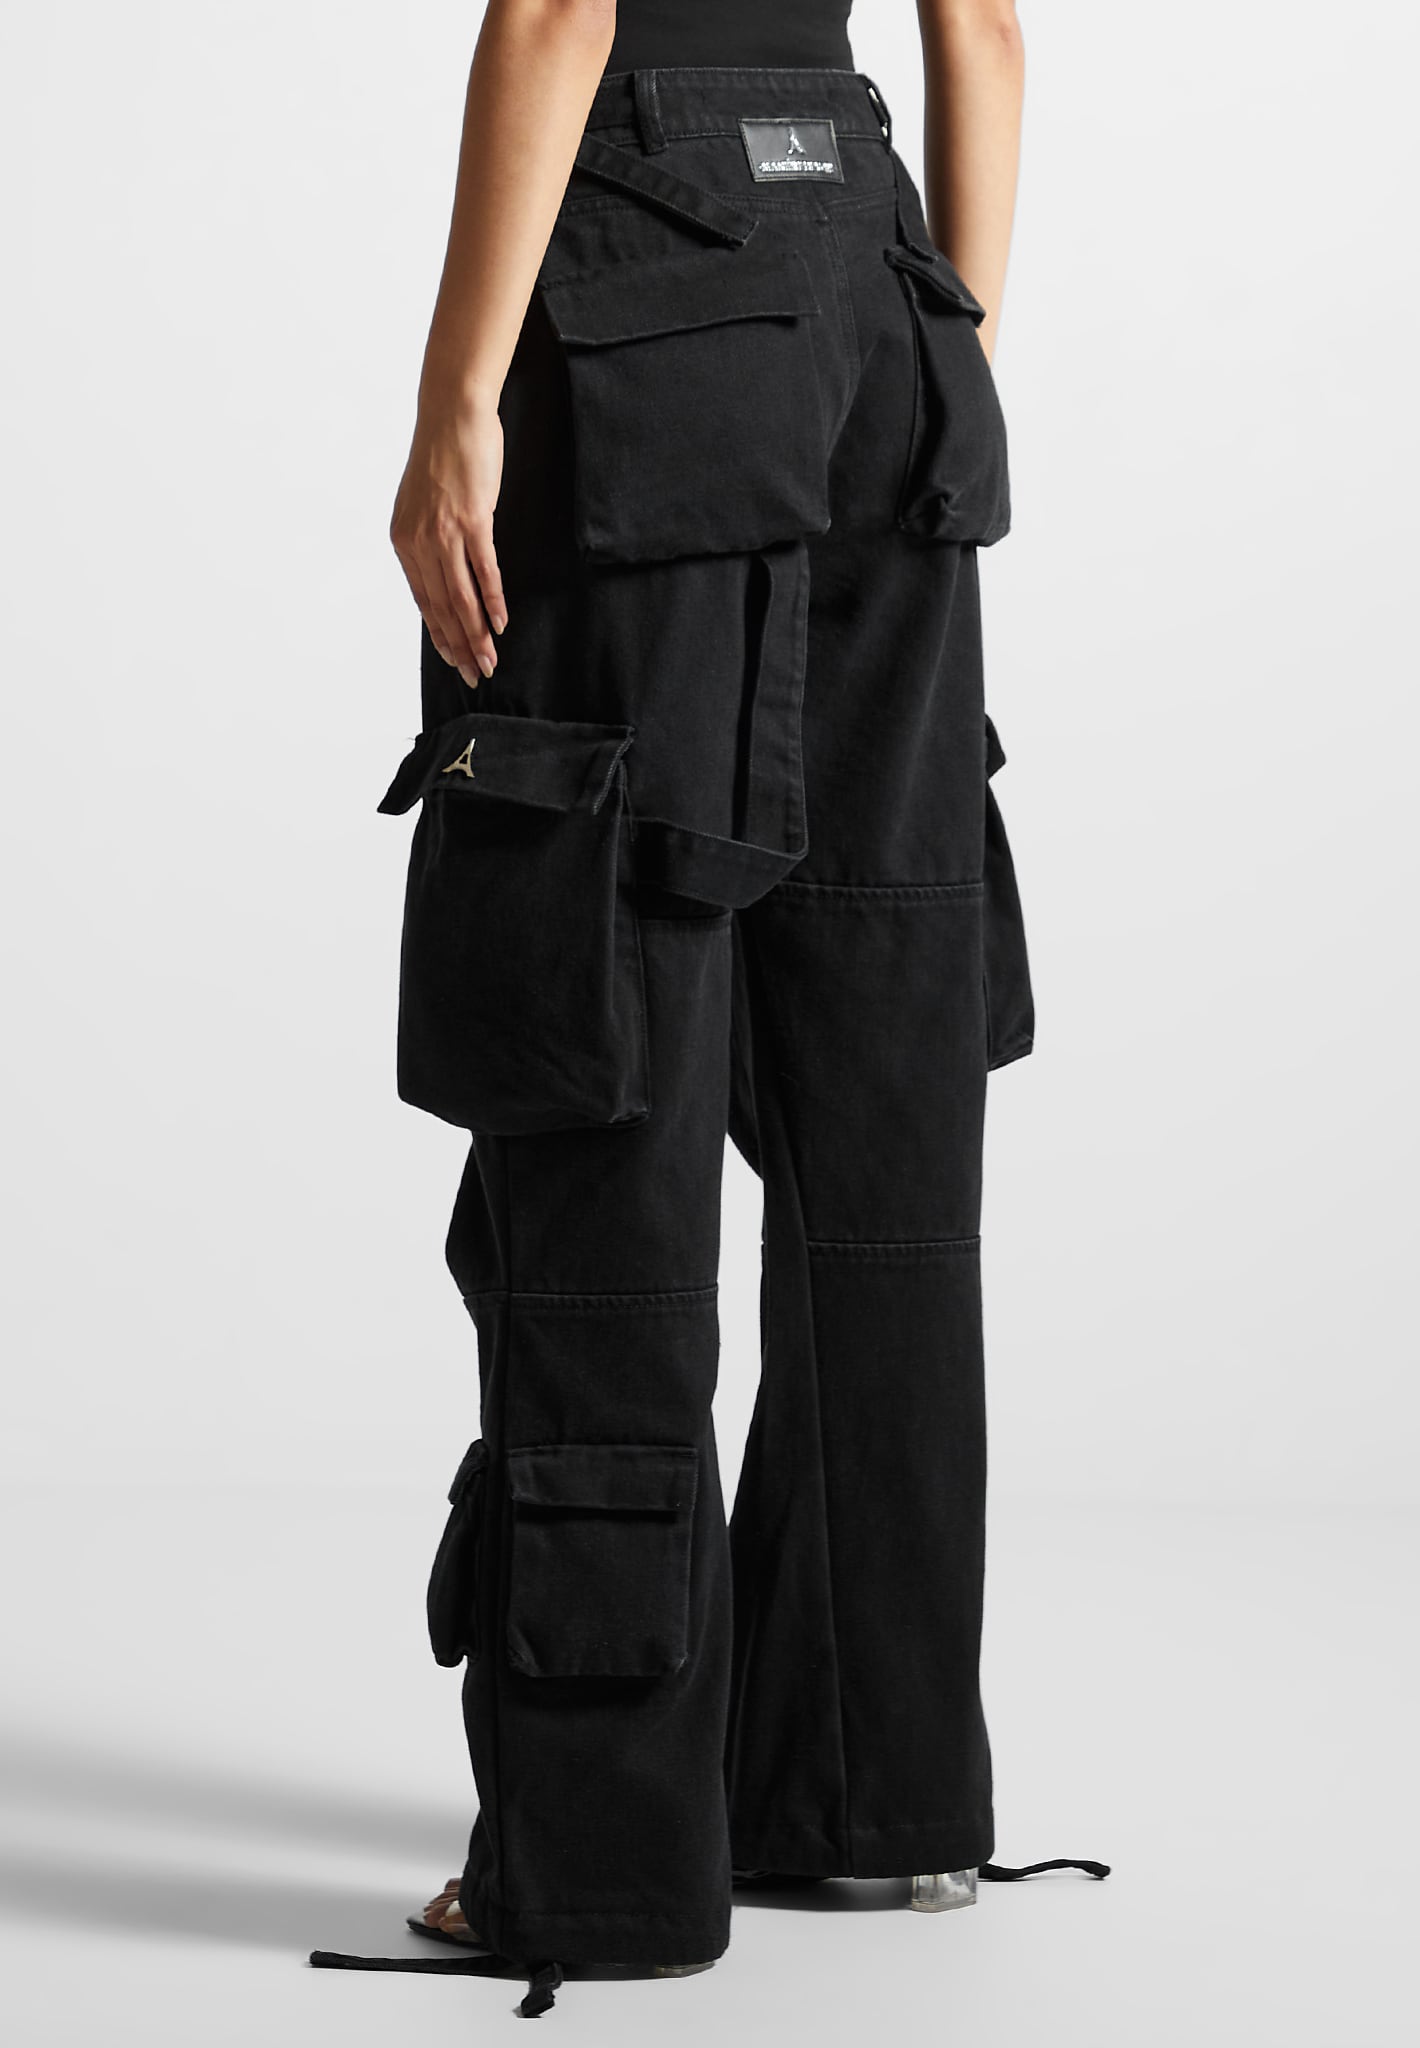 4-Way Stretch Mid-Rise Cargo Pant - 28